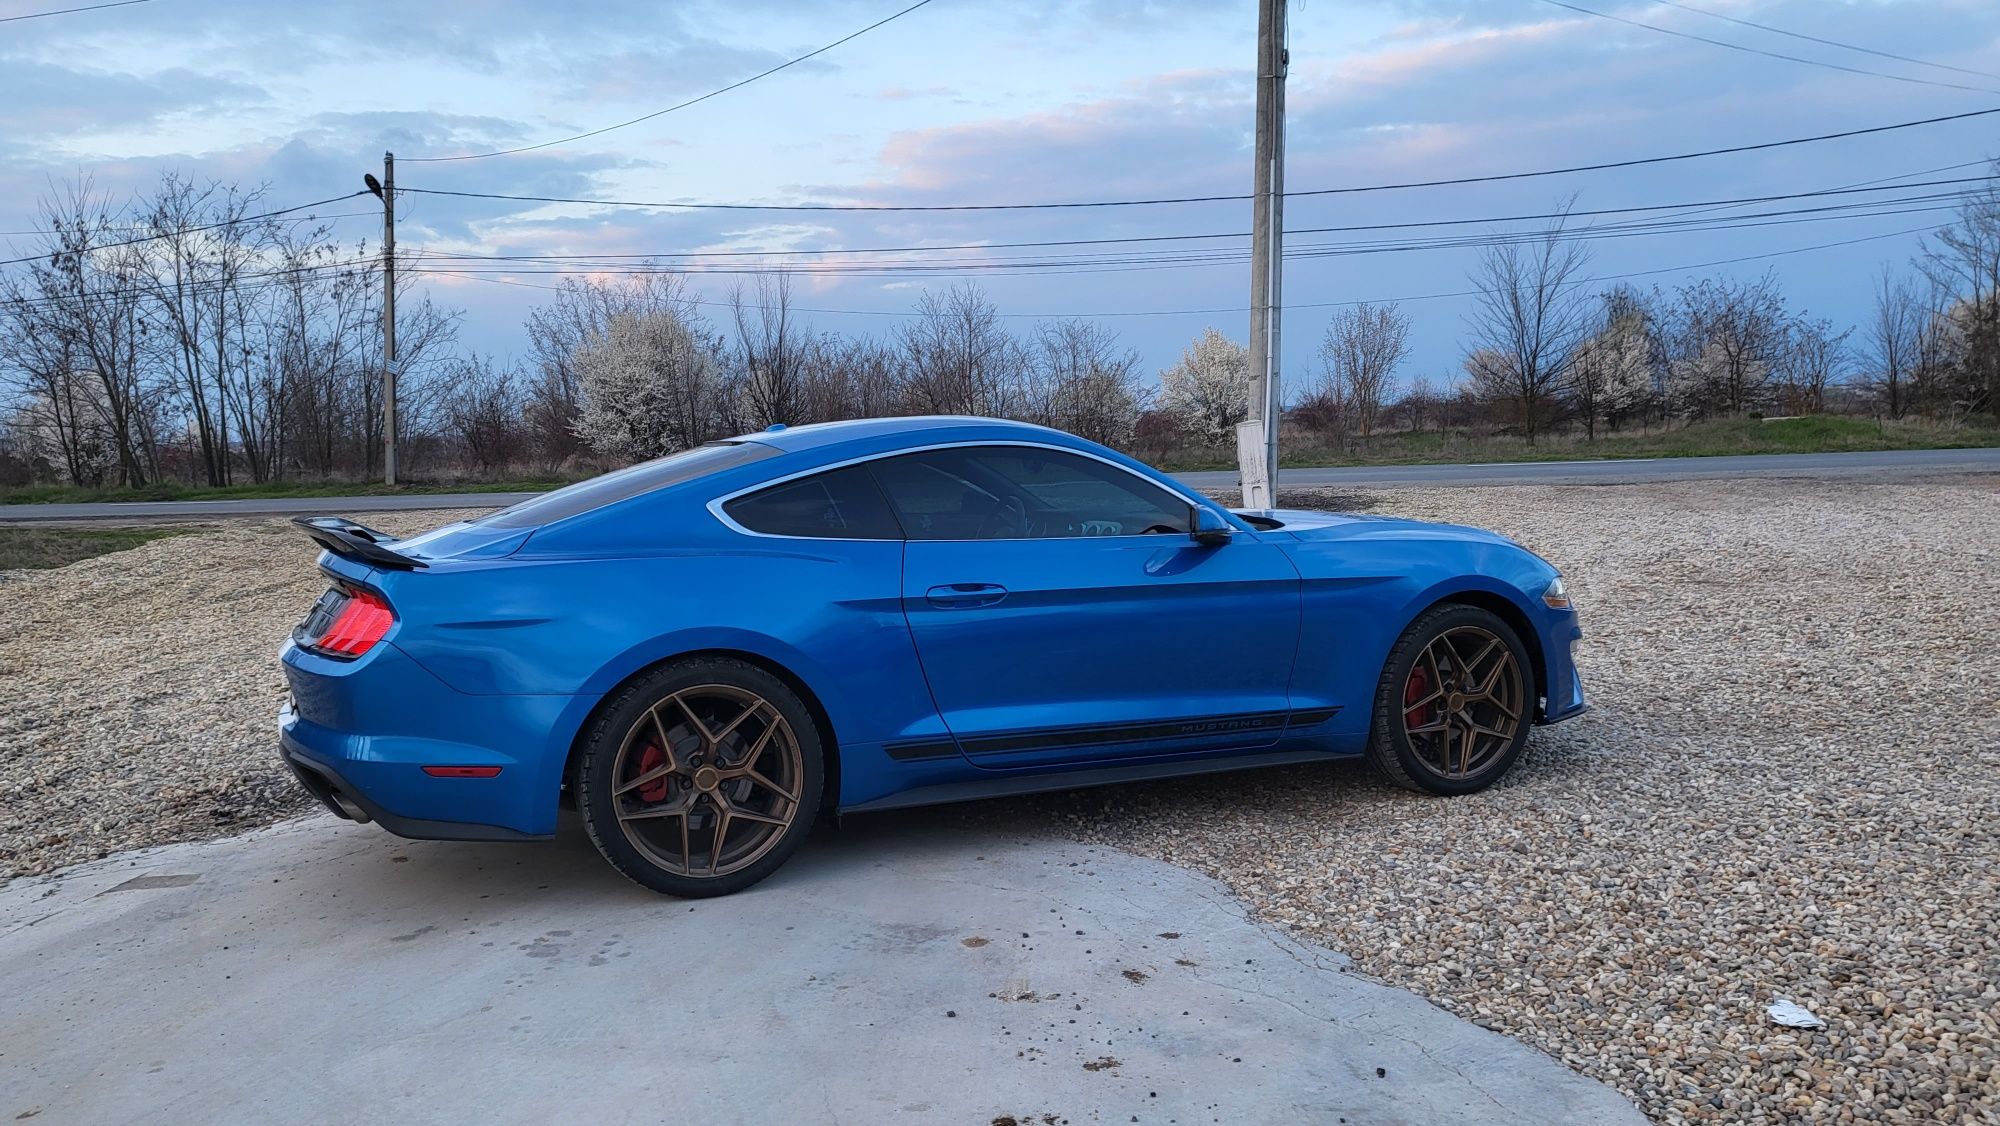 Ford Mustang 2.3 ecoboost SUA 2019